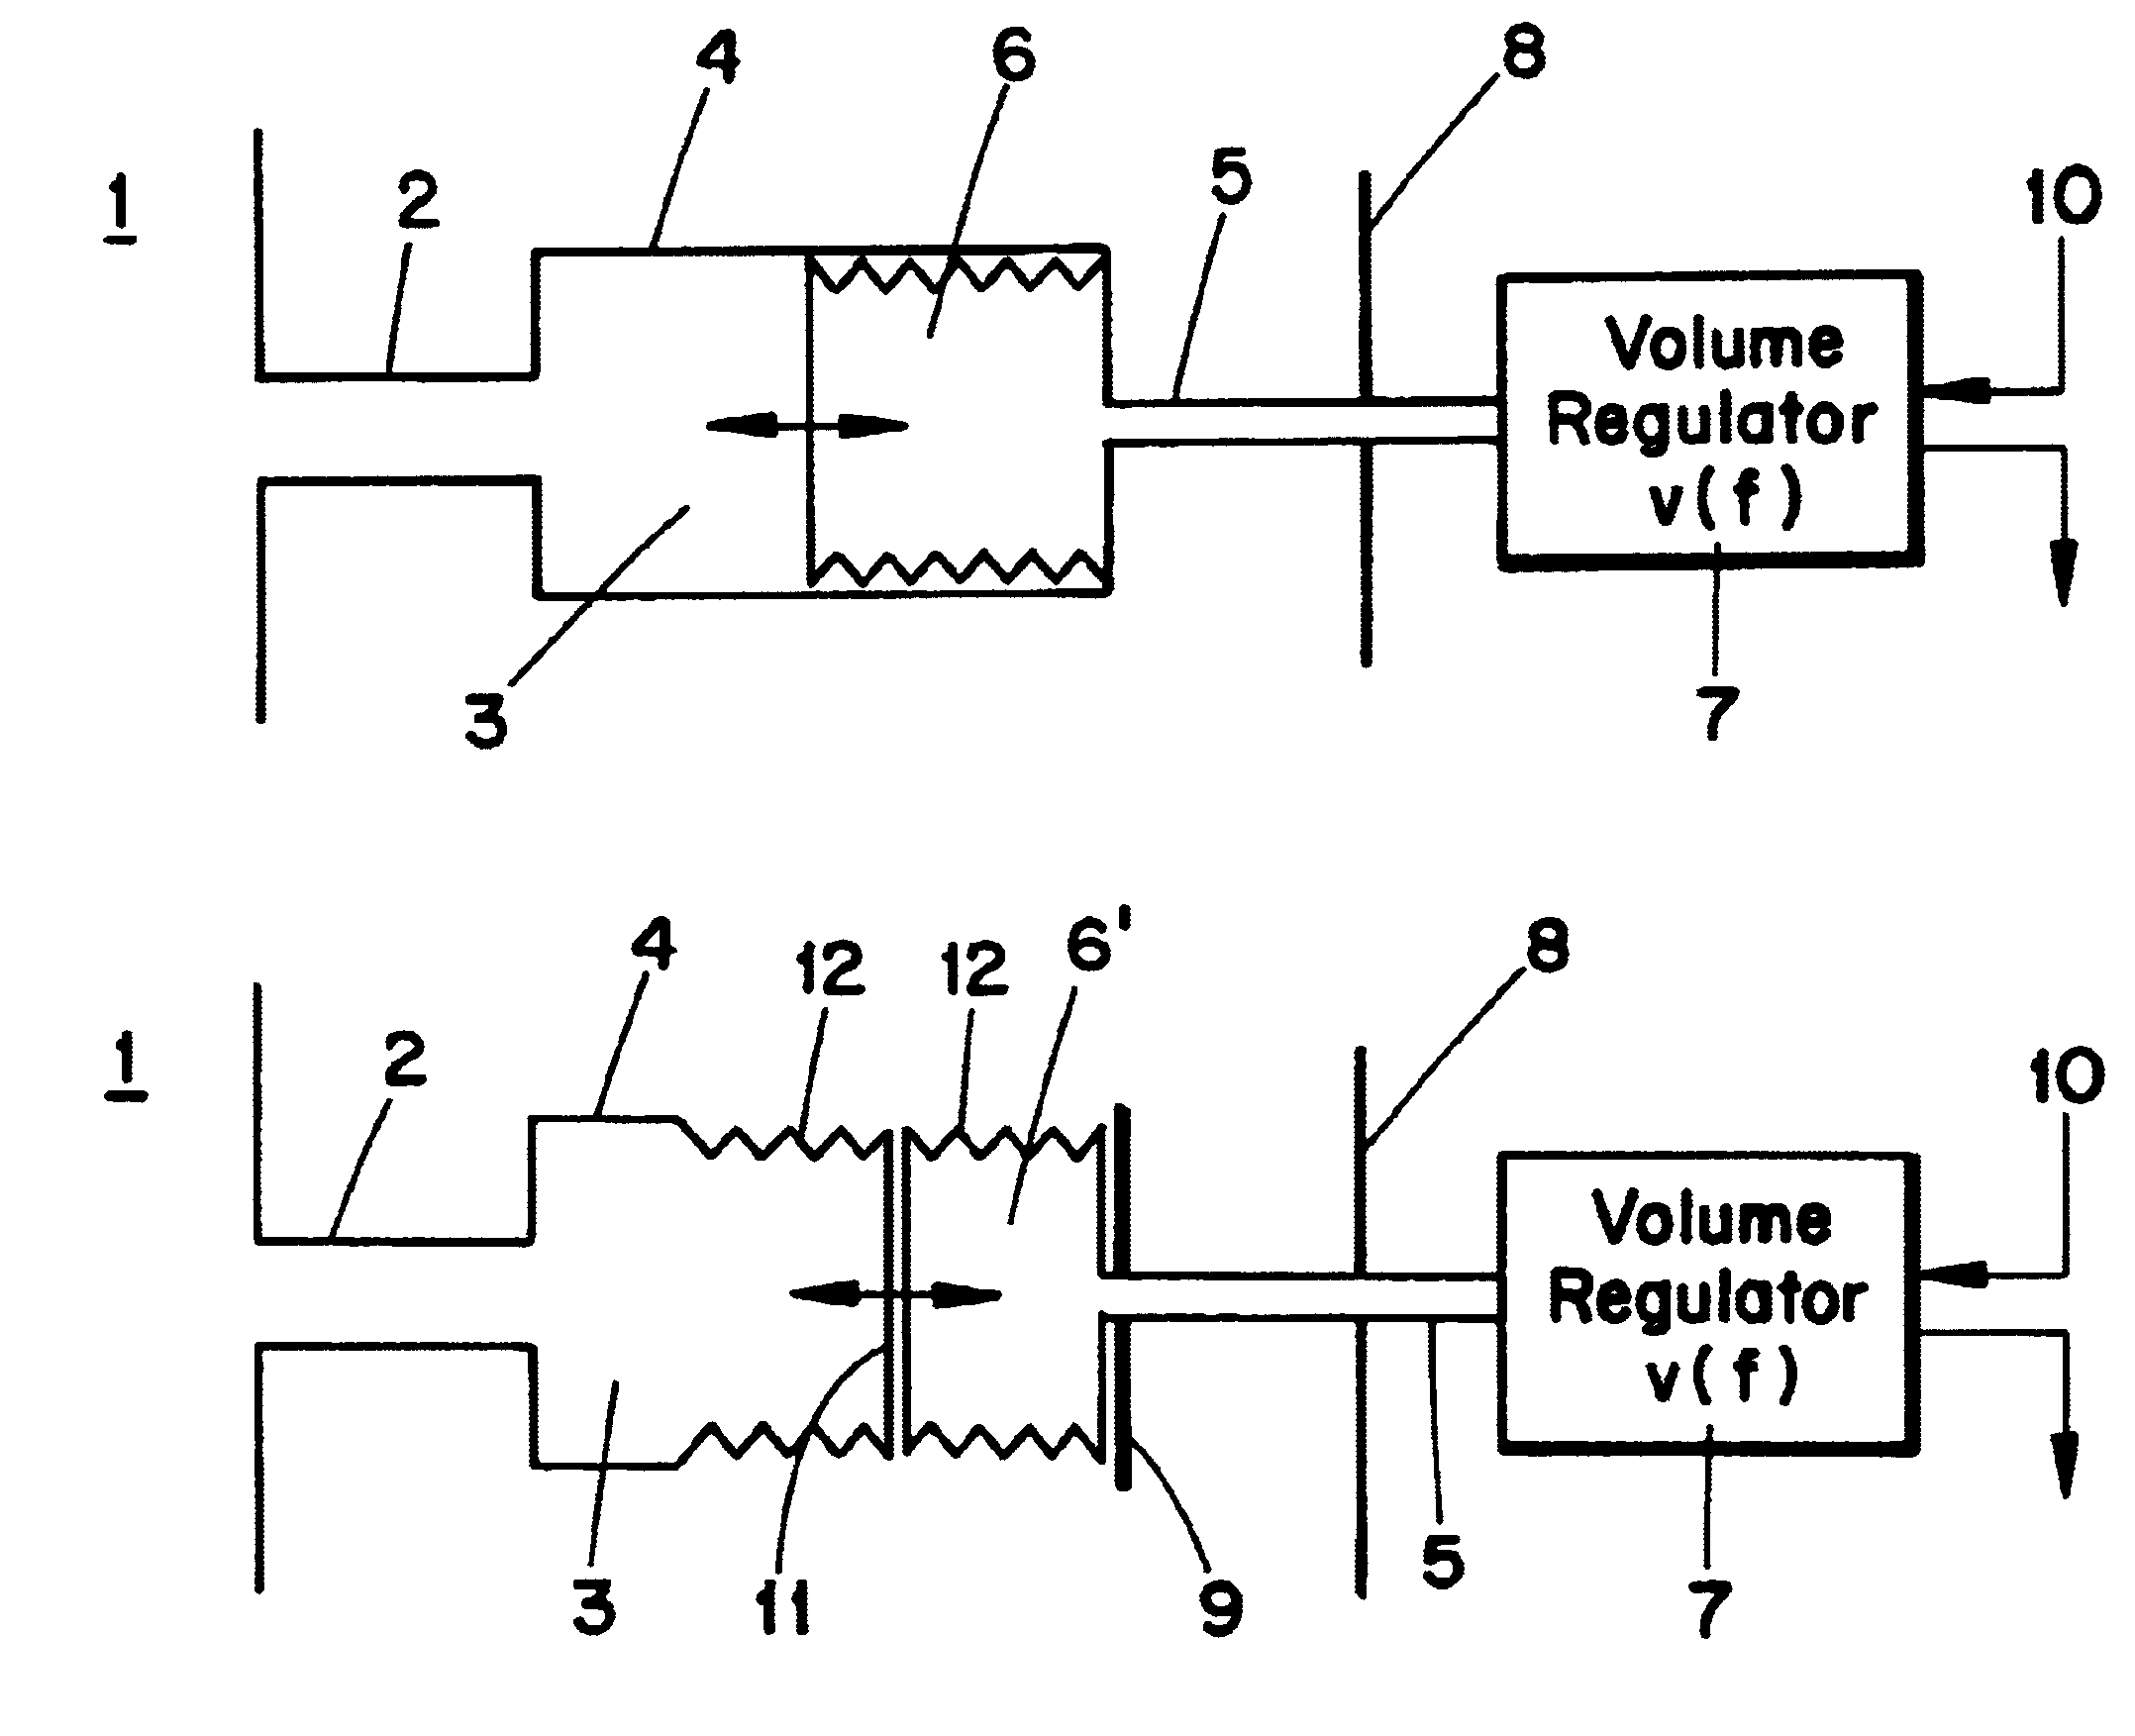 Apparatus for damping acoustic vibrations in a combustor